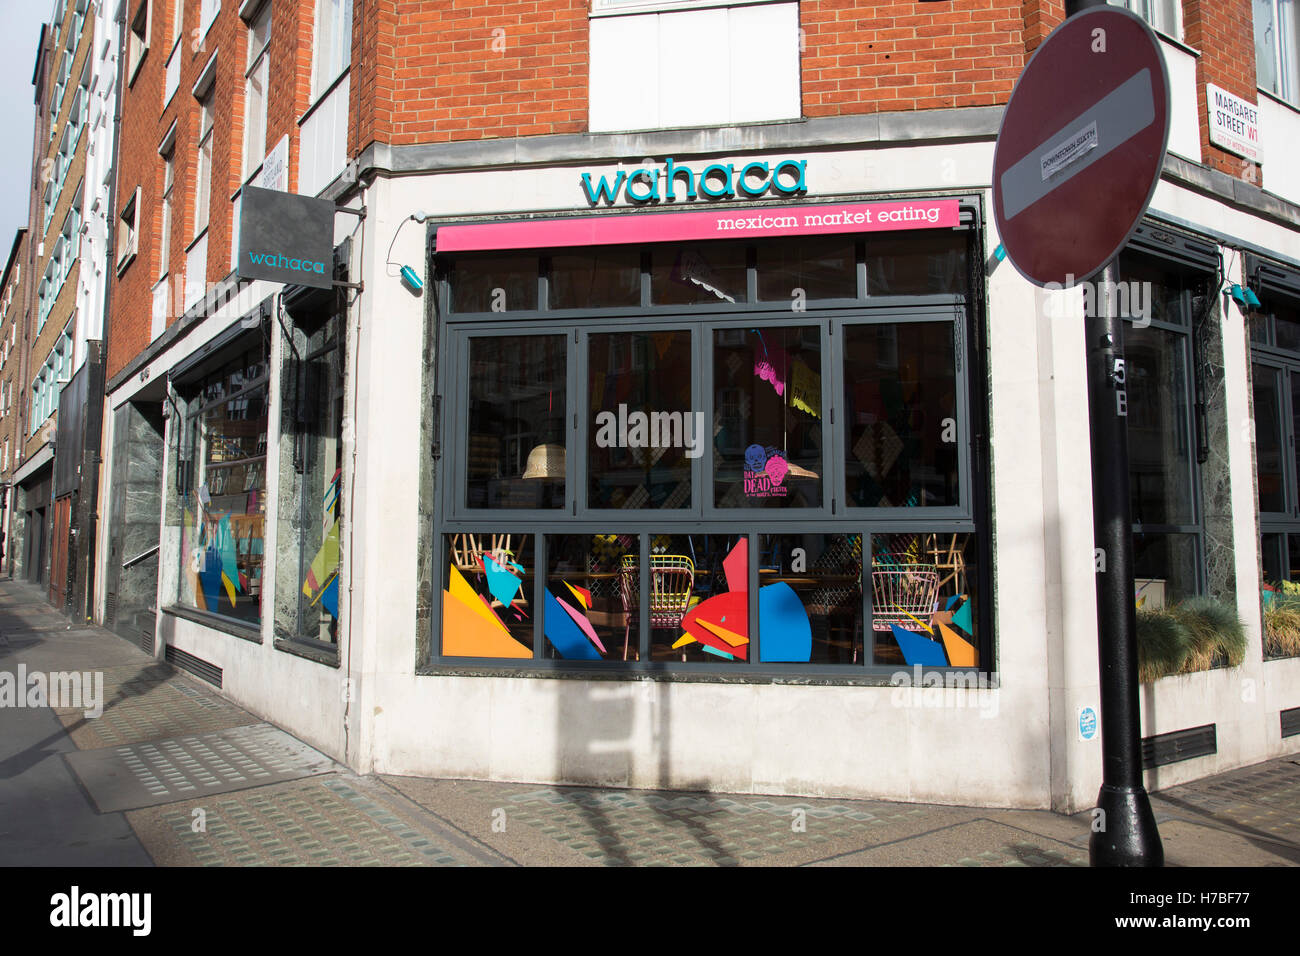 Following a suspected outbreak of norovirus, several branches of the Wahaca Mexican food chain were closed after over 350 members of the public and staff fell ill of a probable breakout of the winter vomiting bug, including this branch in Great Portland Street in London, United Kingdom. Co-founders Thomasina Miers, and Mark Selby, said: “We assessed each case and when it became clear they were not isolated incidents, we got in touch with relevant officials at Public Health England and environmental health officers.” In all nine branches were suspected and closed, and four have reopened as of 3 Stock Photo